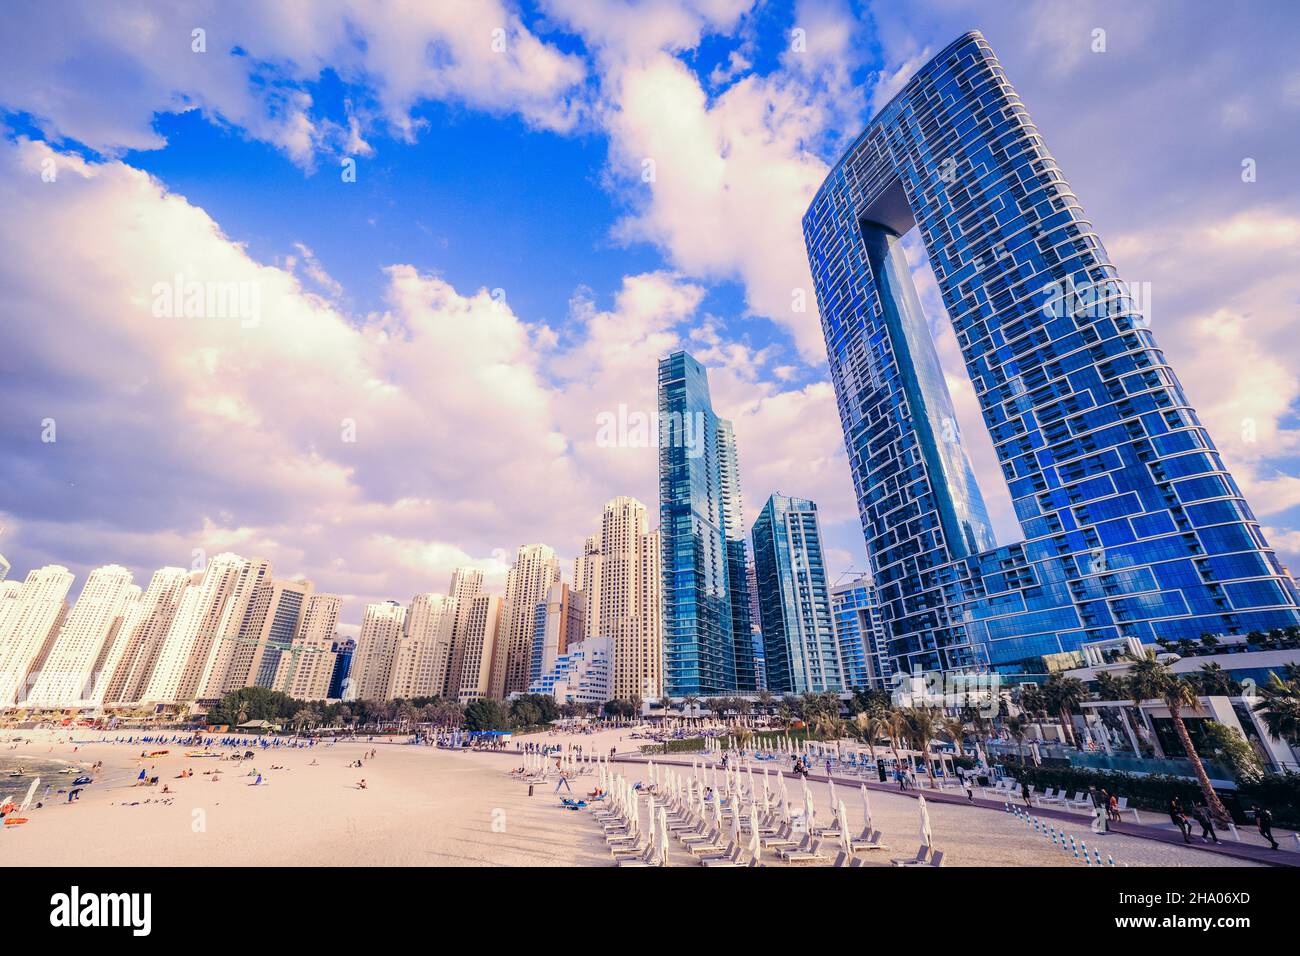 Scenic view of the skyline of the Dubai Marina district with it's tall skyscrapers raising next to the beach and the waterfront, Dubai, UAE Stock Photo